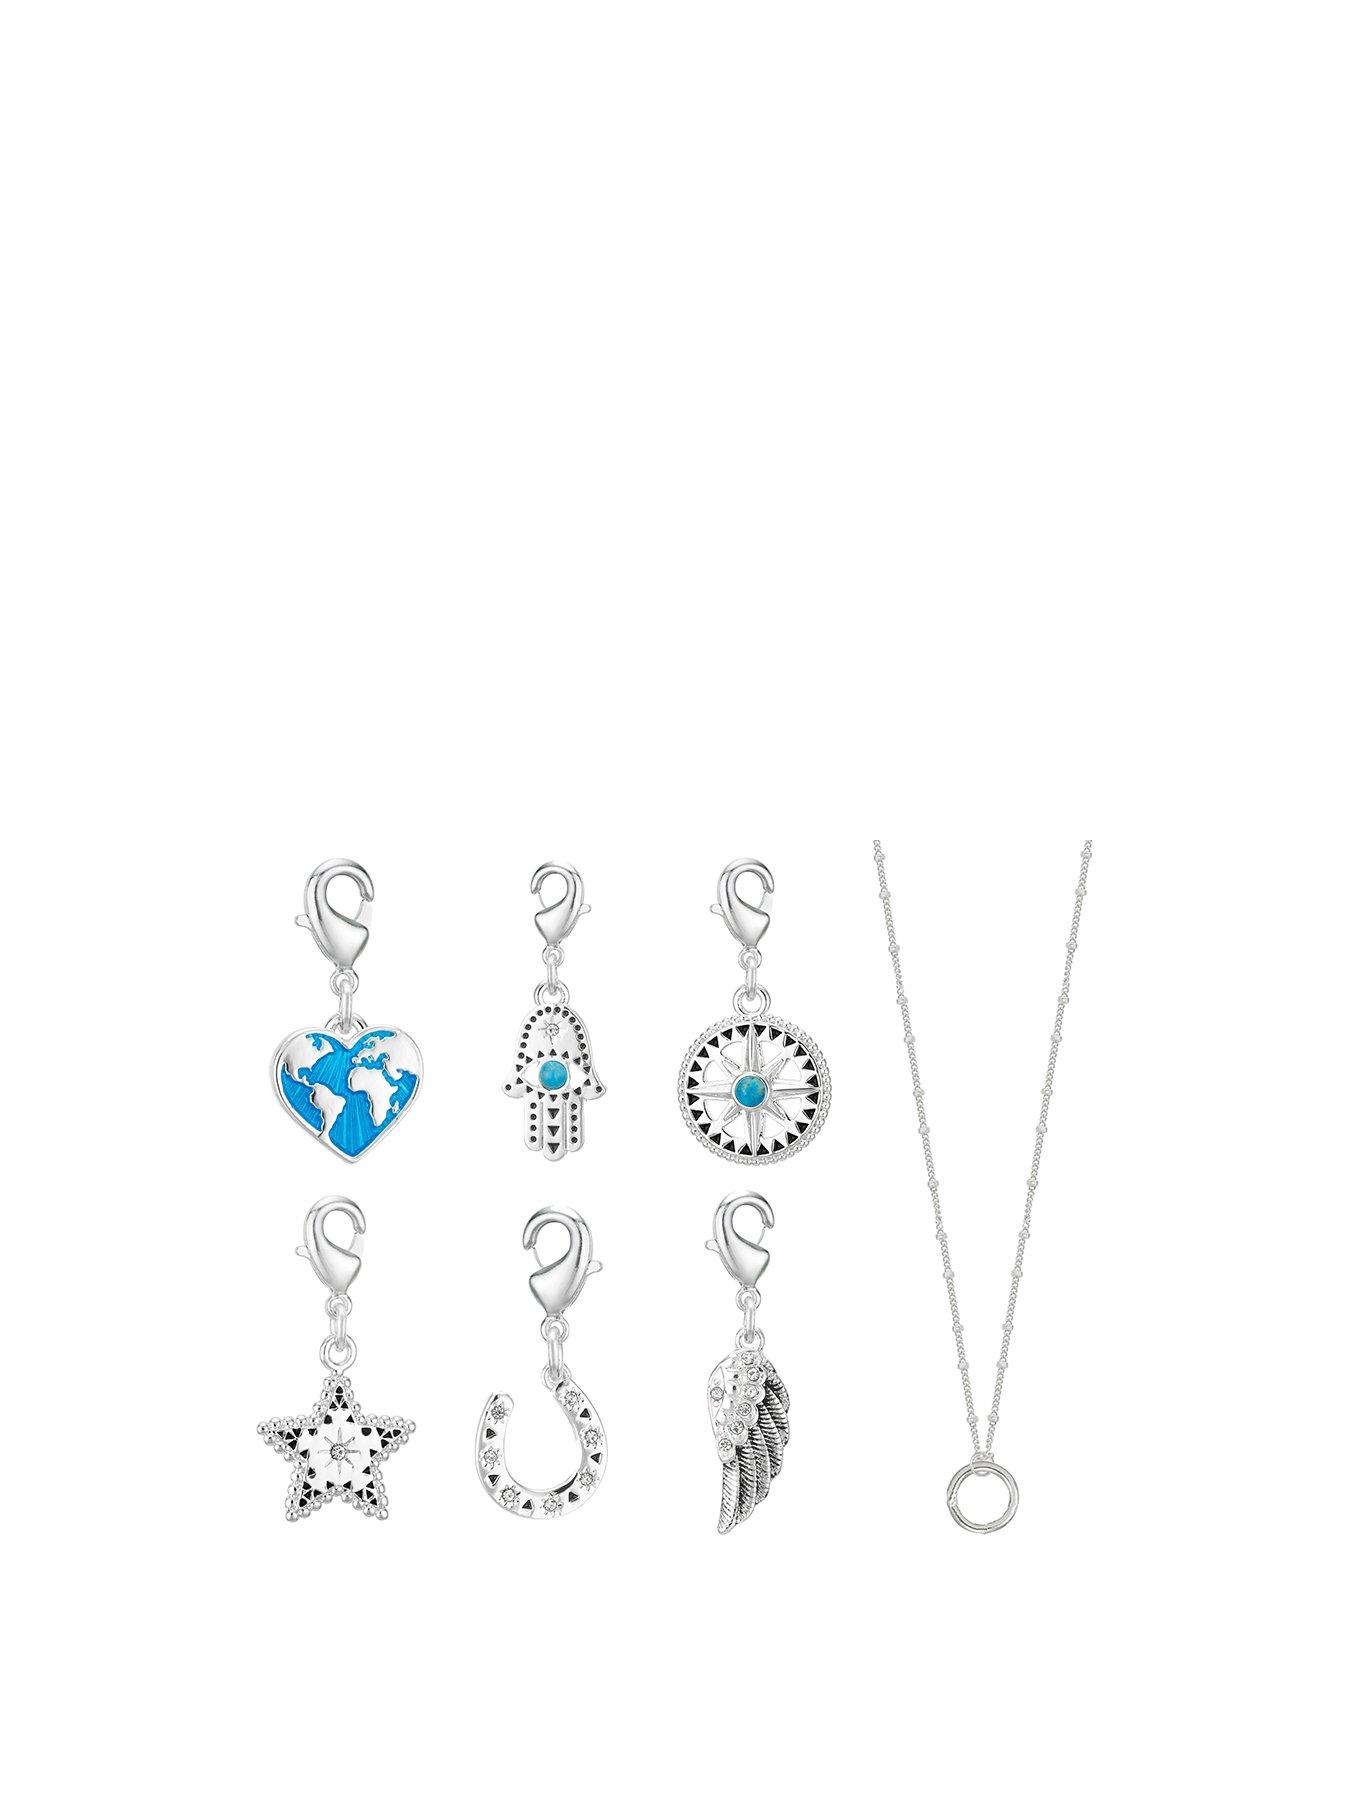 Jewellery & watches Jet Setter Charm Necklace & Charms Gift Set